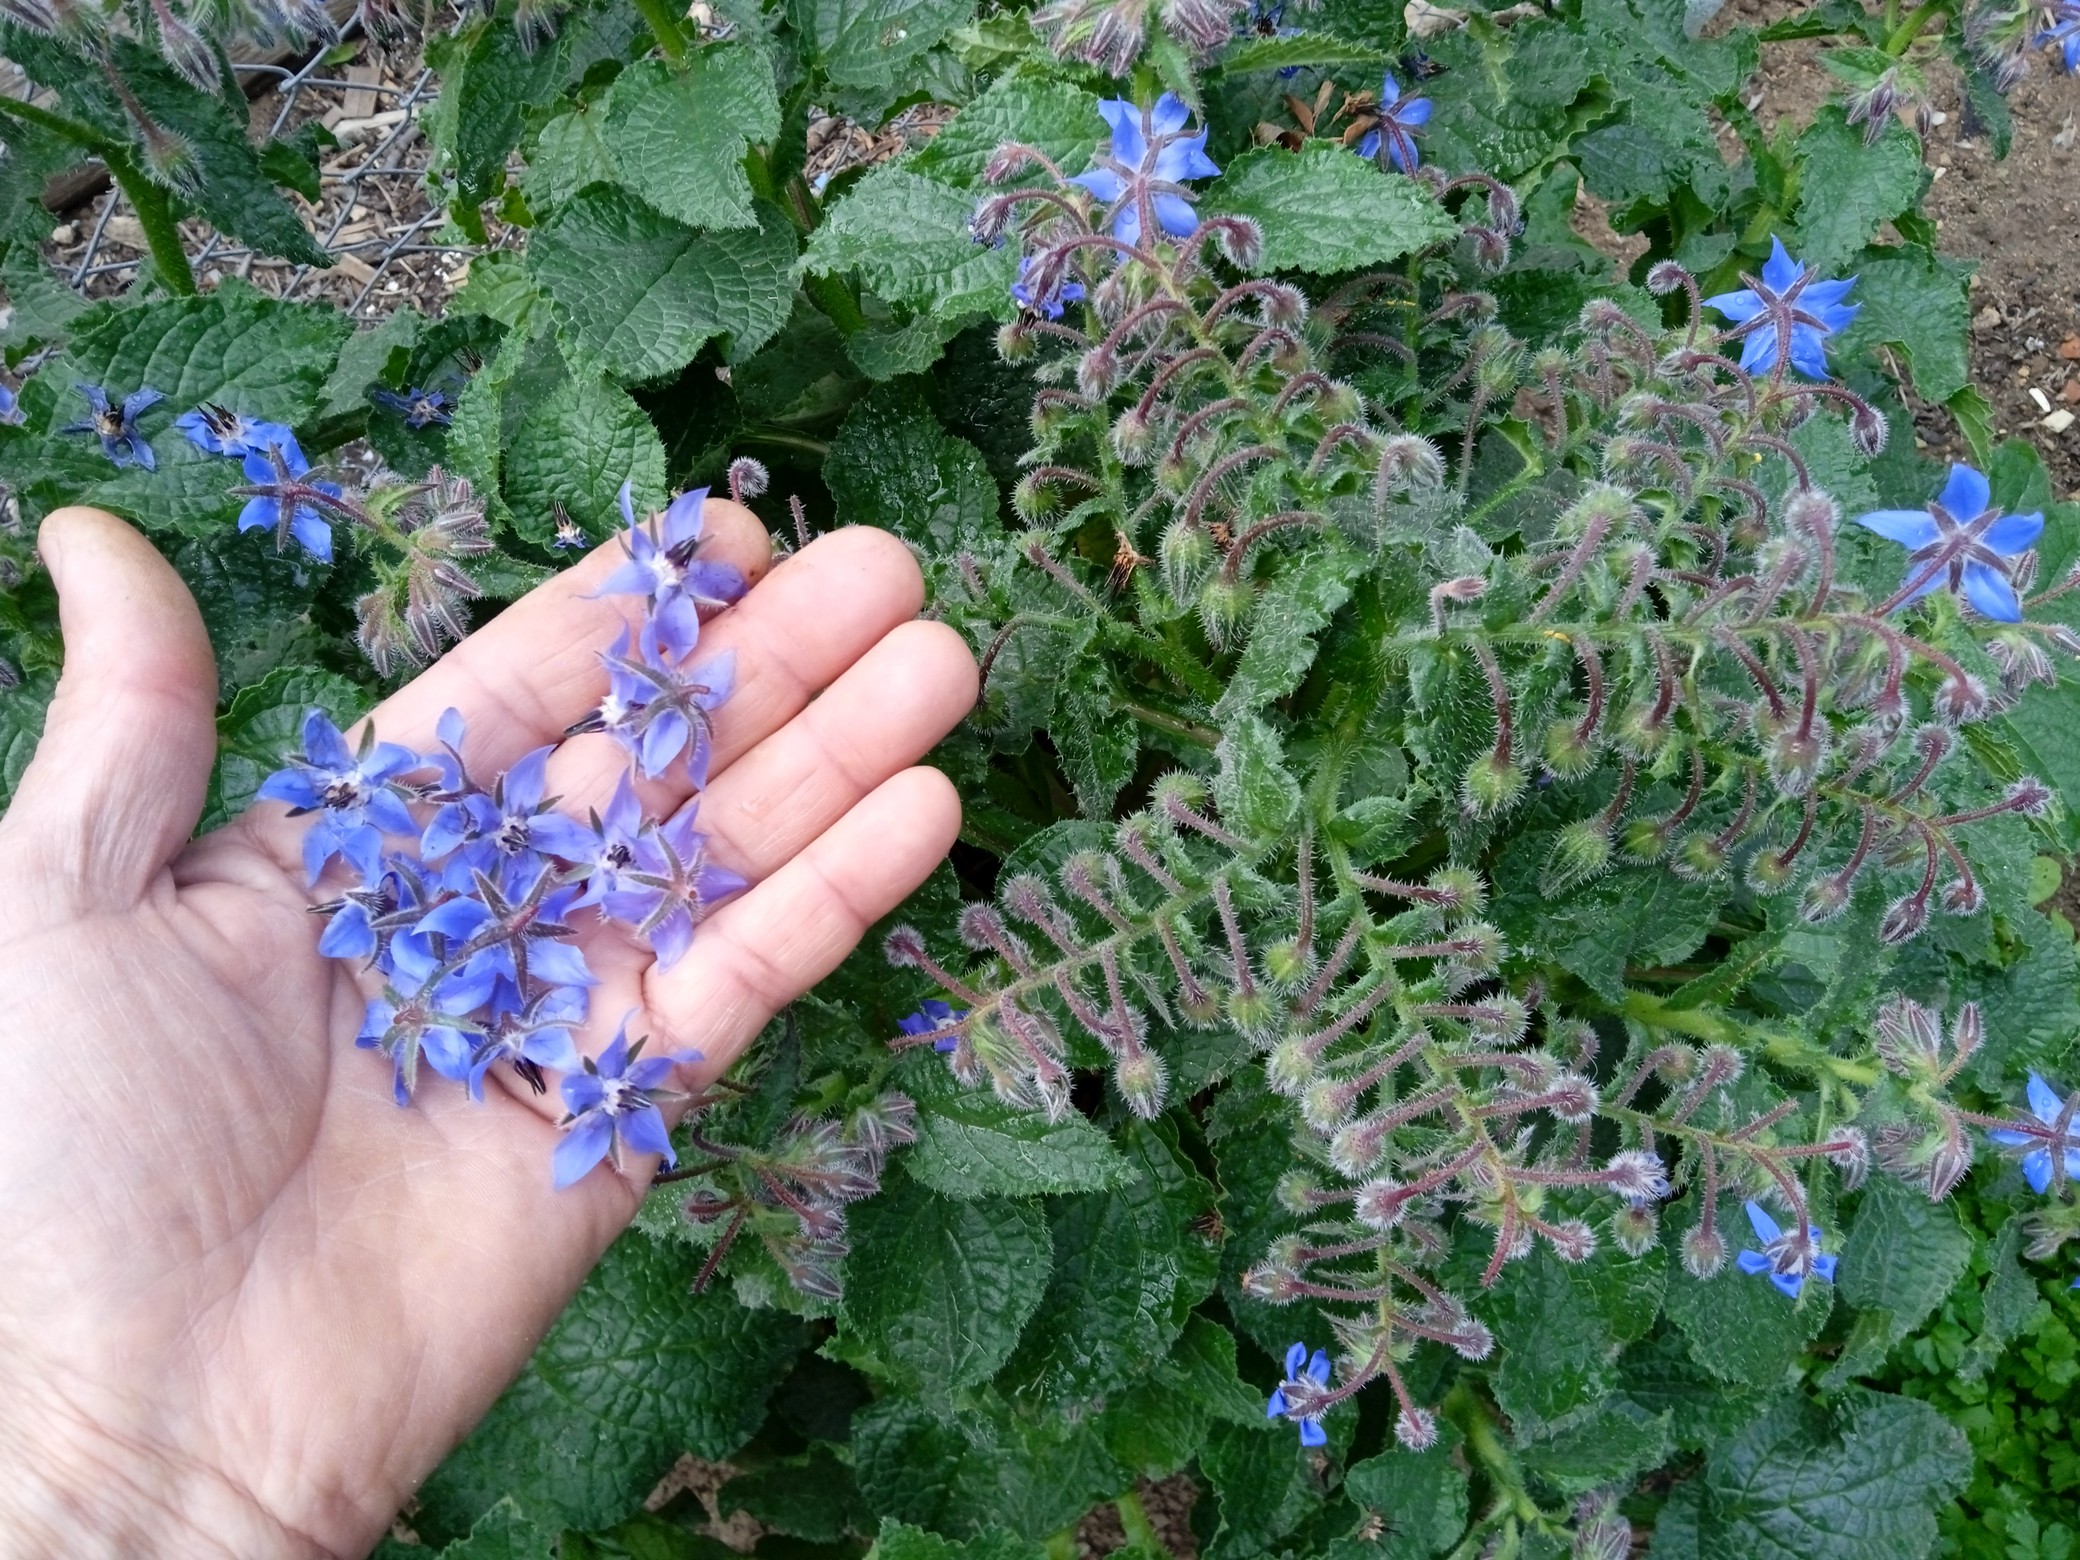 When borage plant starts flowering, you can harvest frequently to encourage more bloom-production.